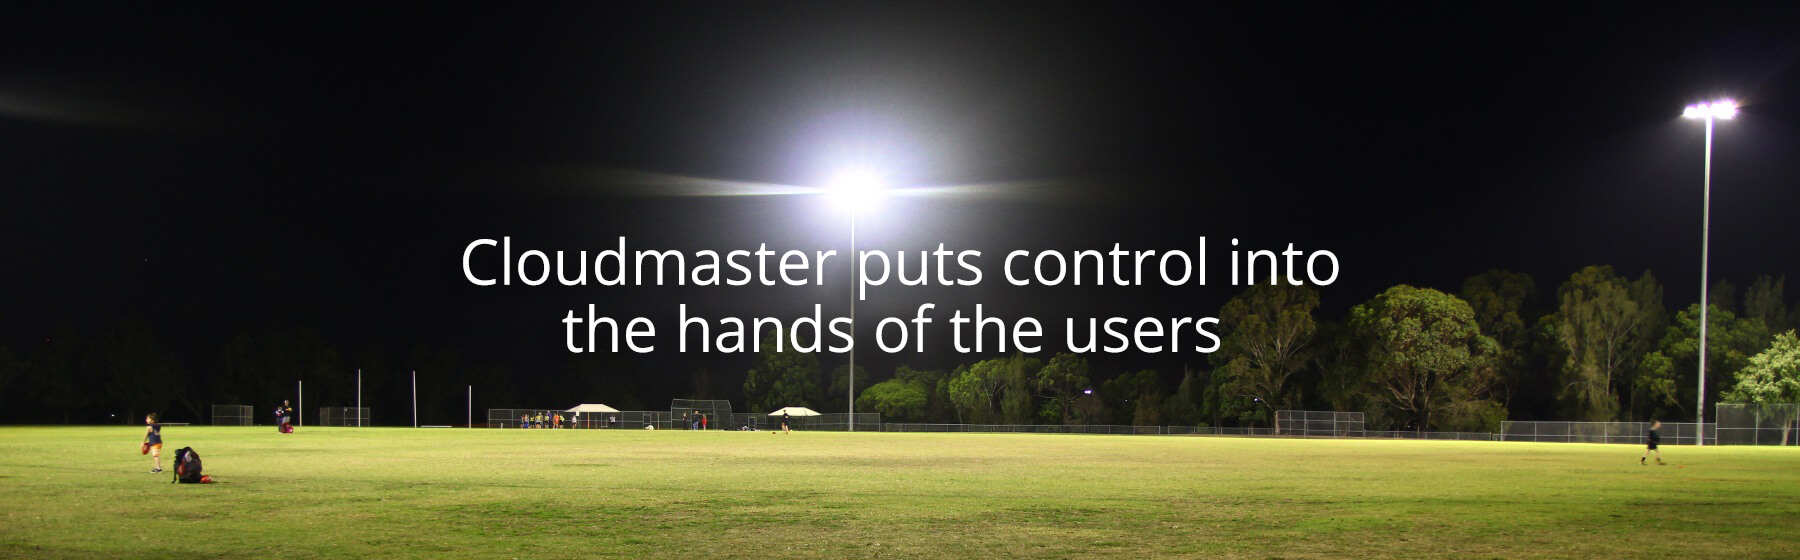 Cloudmaster puts control into the hands of the users